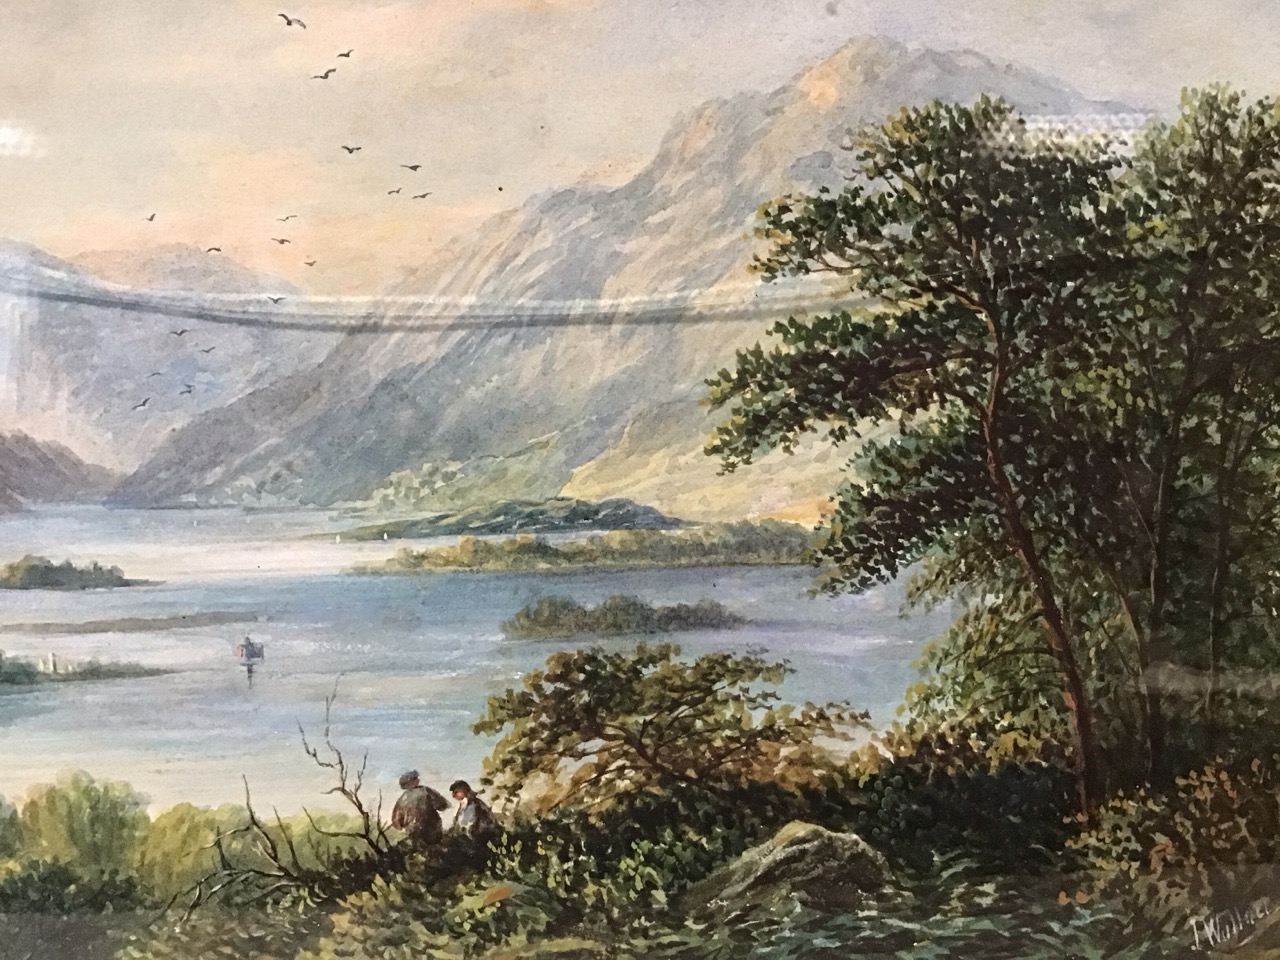 J Wallace, C19th watercolour, lake landscape with figures in foreground, signed, mounted & gilt - Image 3 of 3